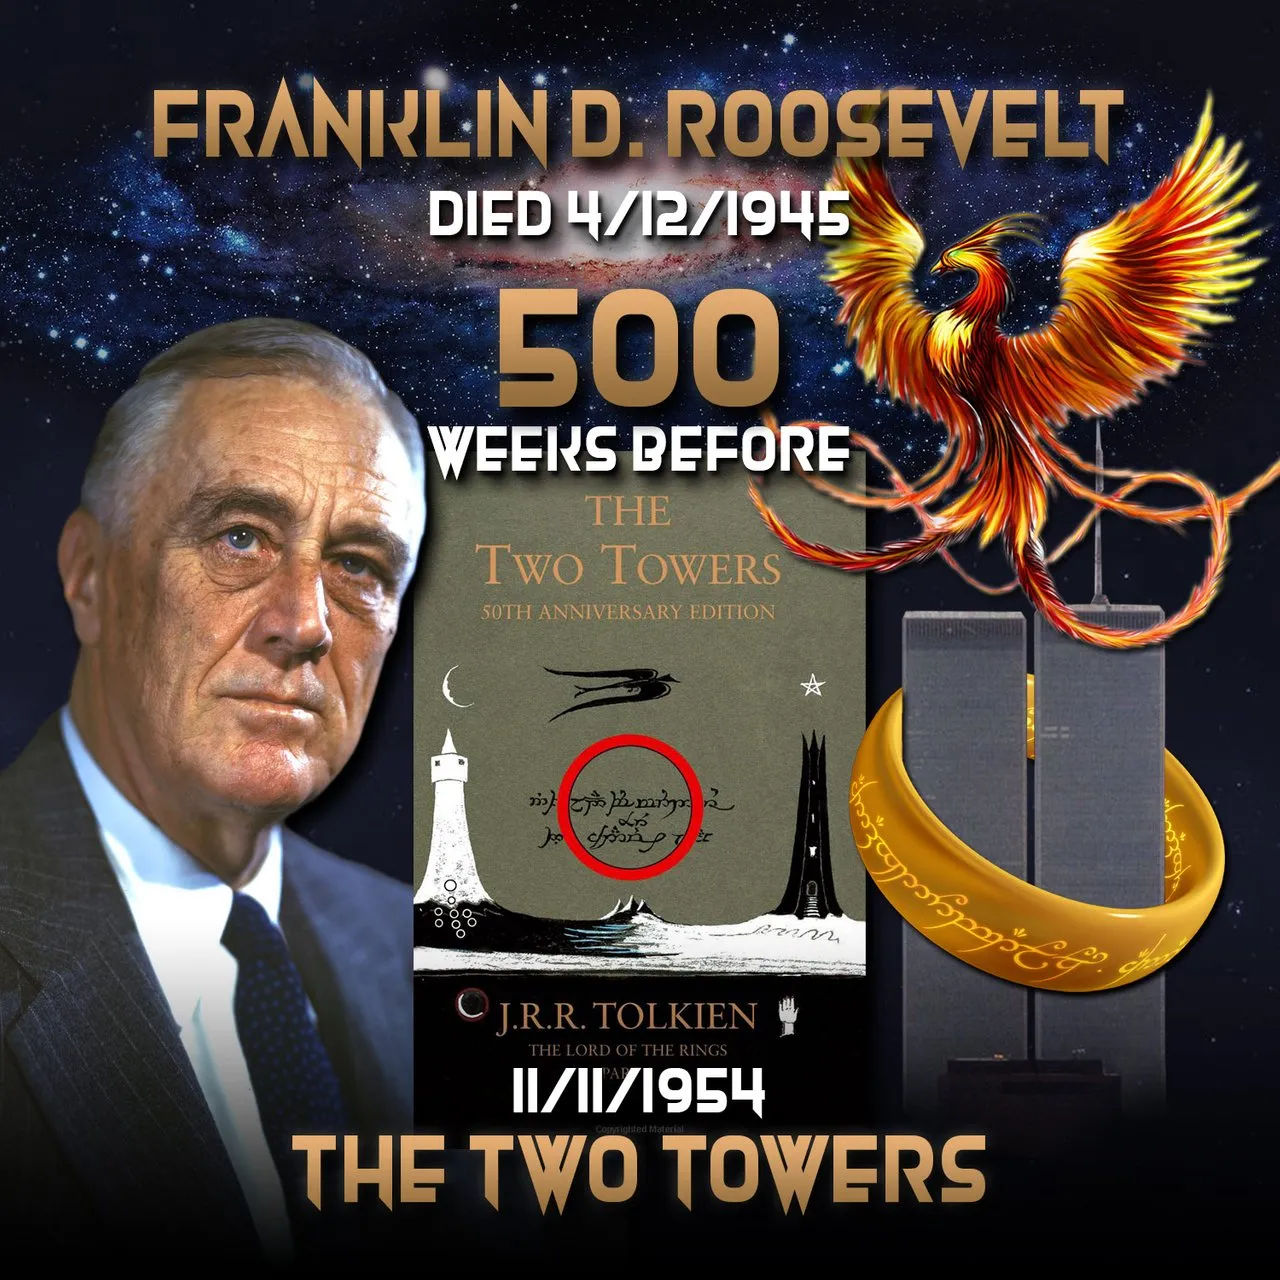 APX Franklin D Roosevelt 500 The Two Towers.jpg